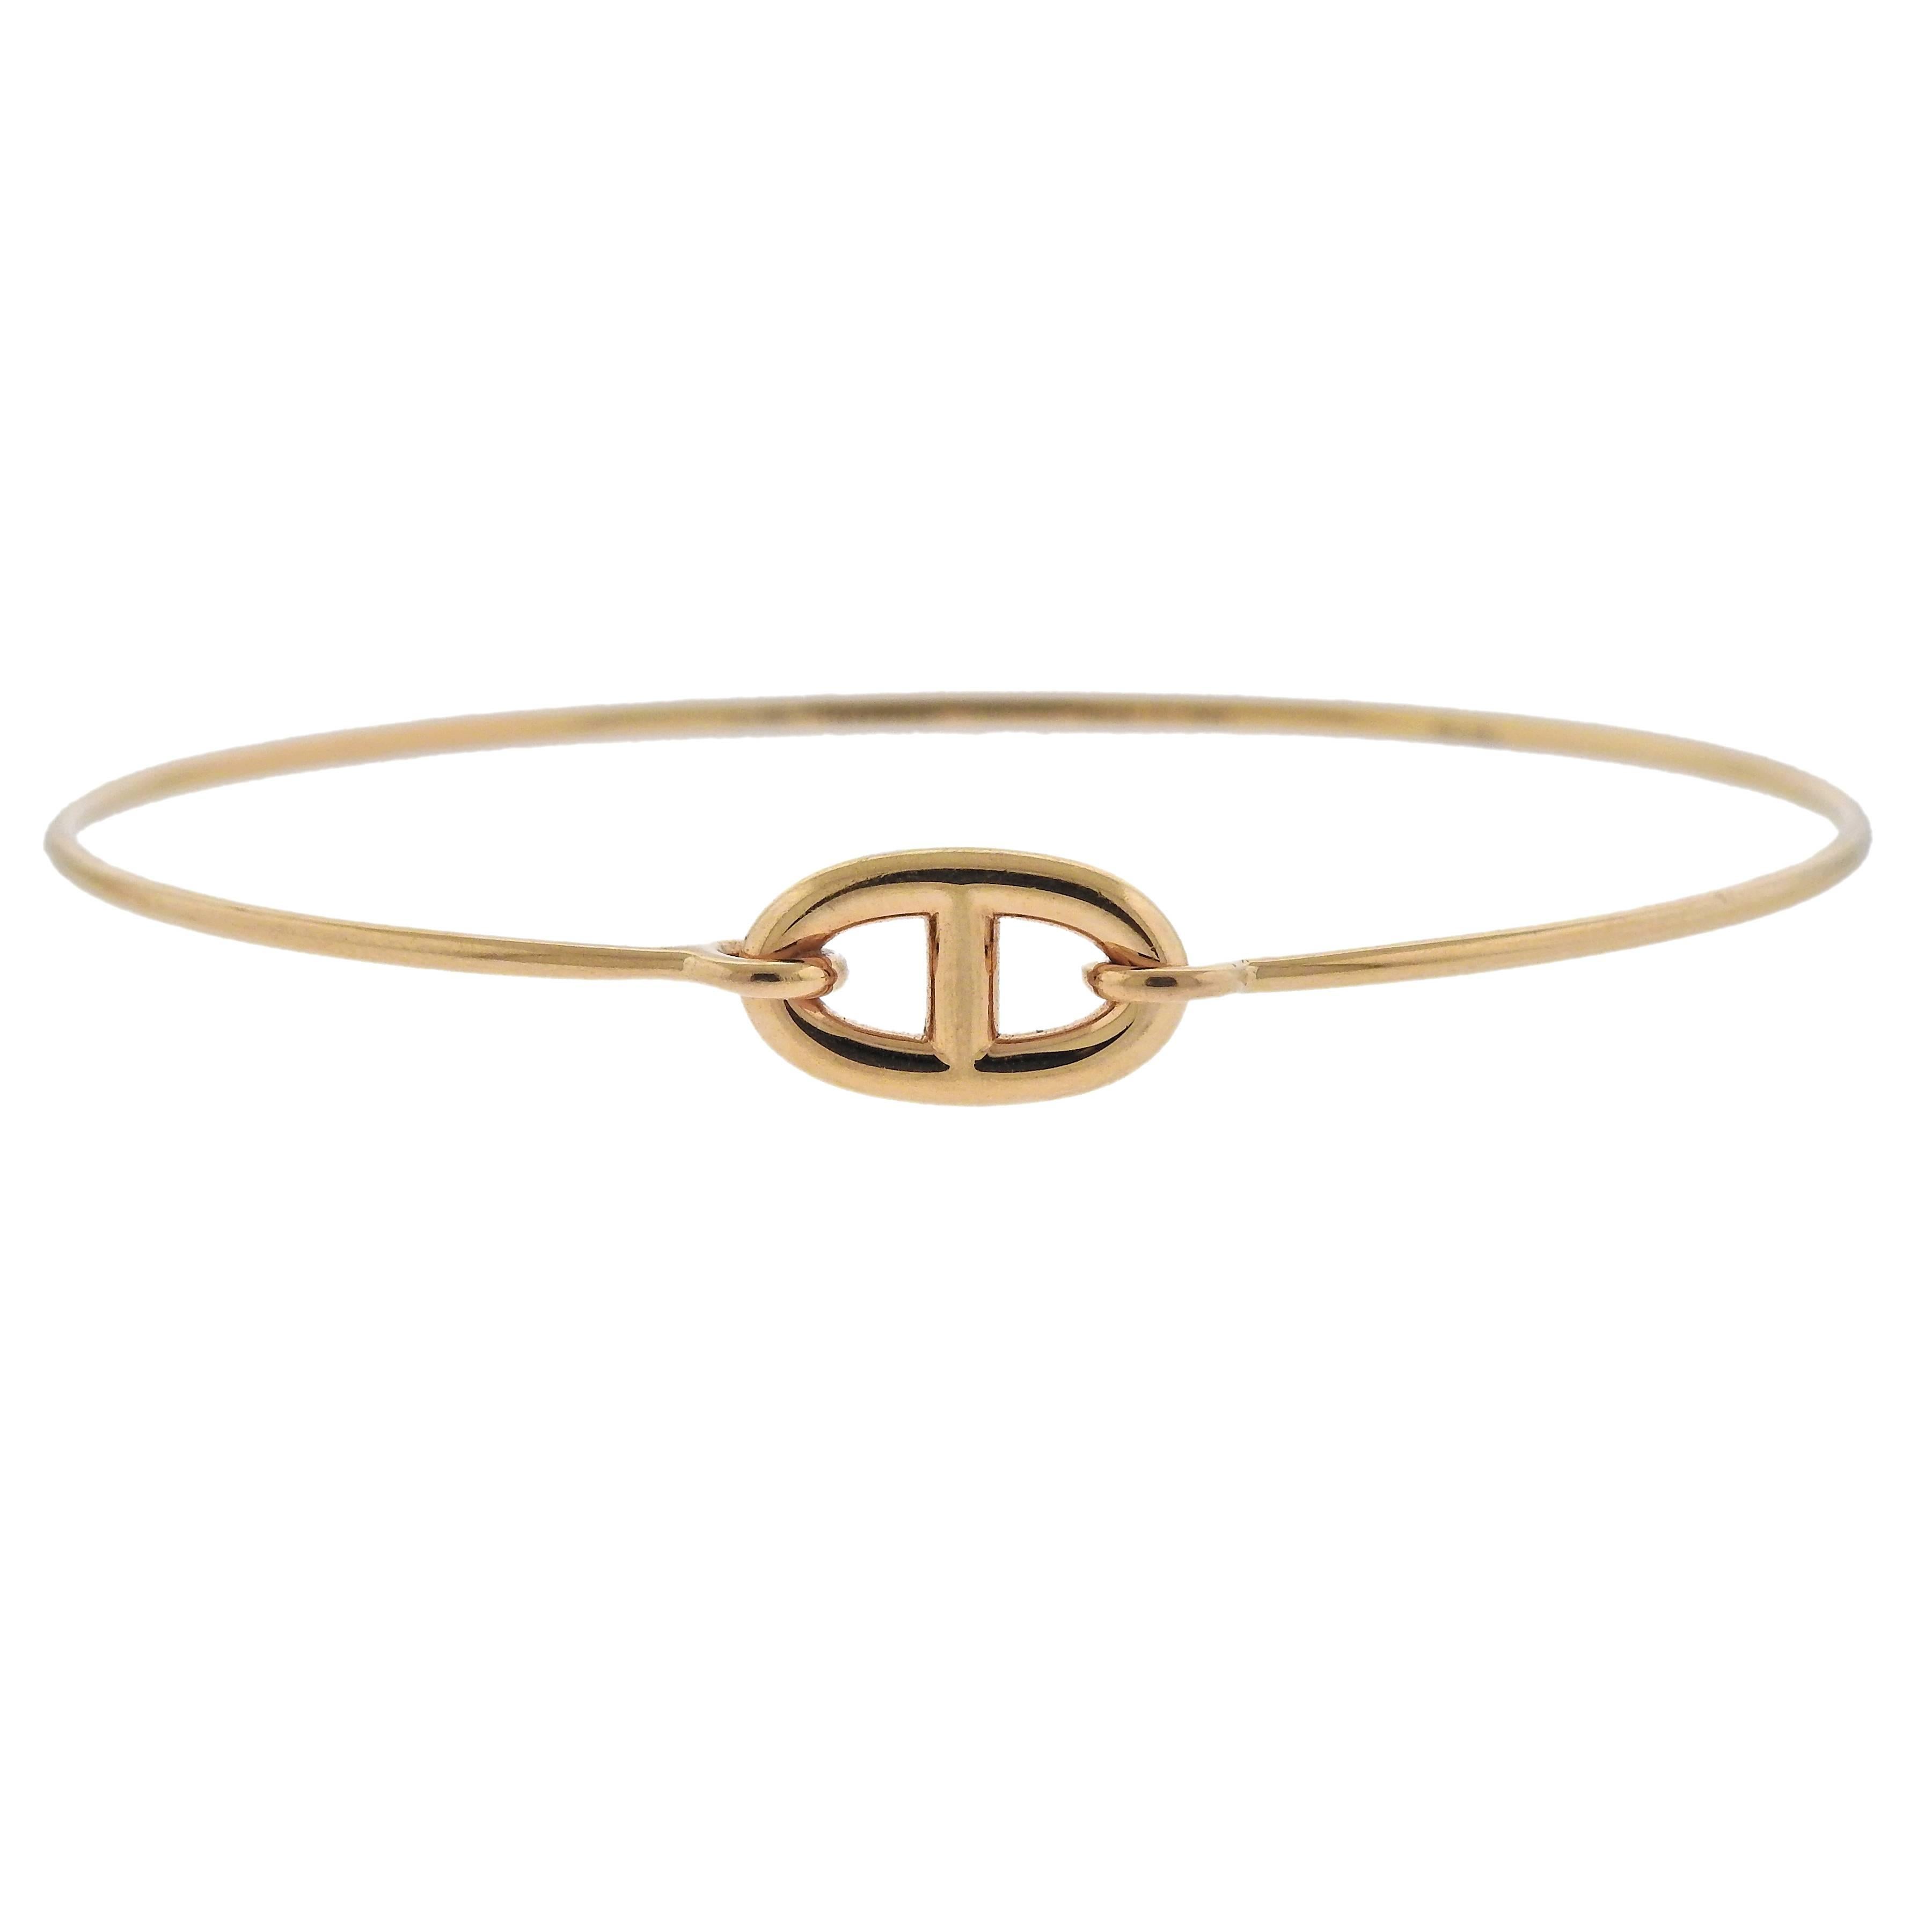 Hermes Ronde H Chaine Ancre Small Gold Bangle Bracelet